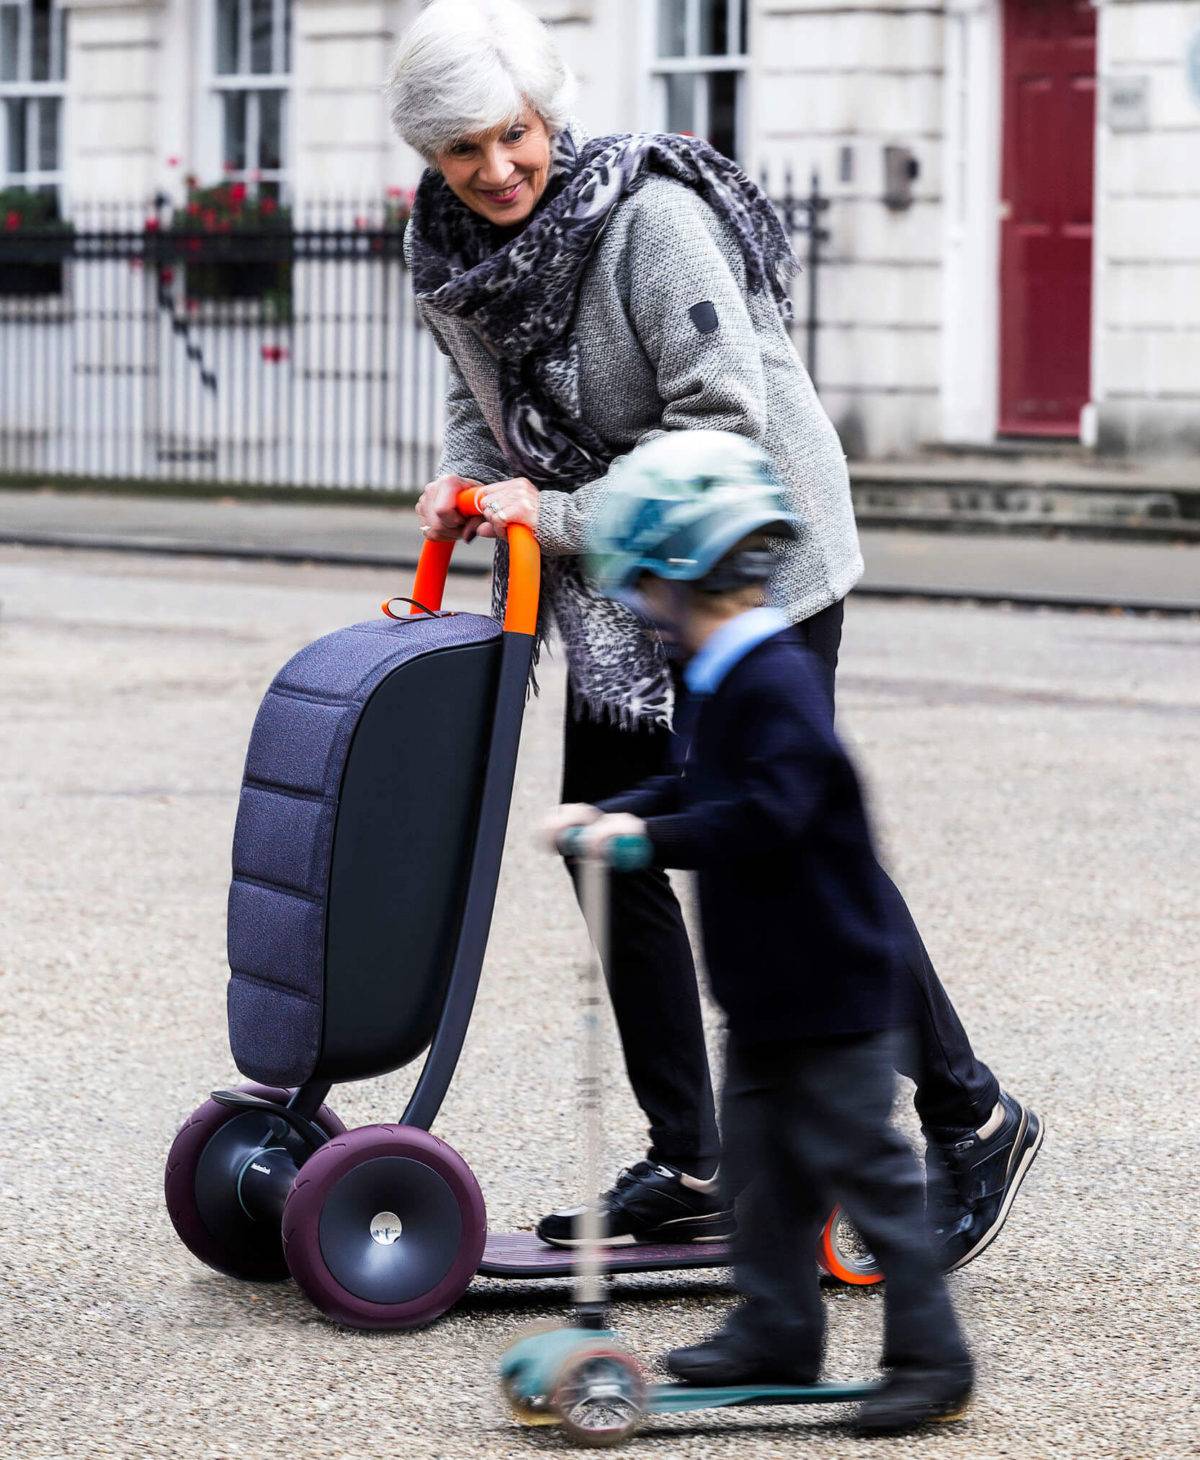 An older woman and a young boy are both riding a personal scooter